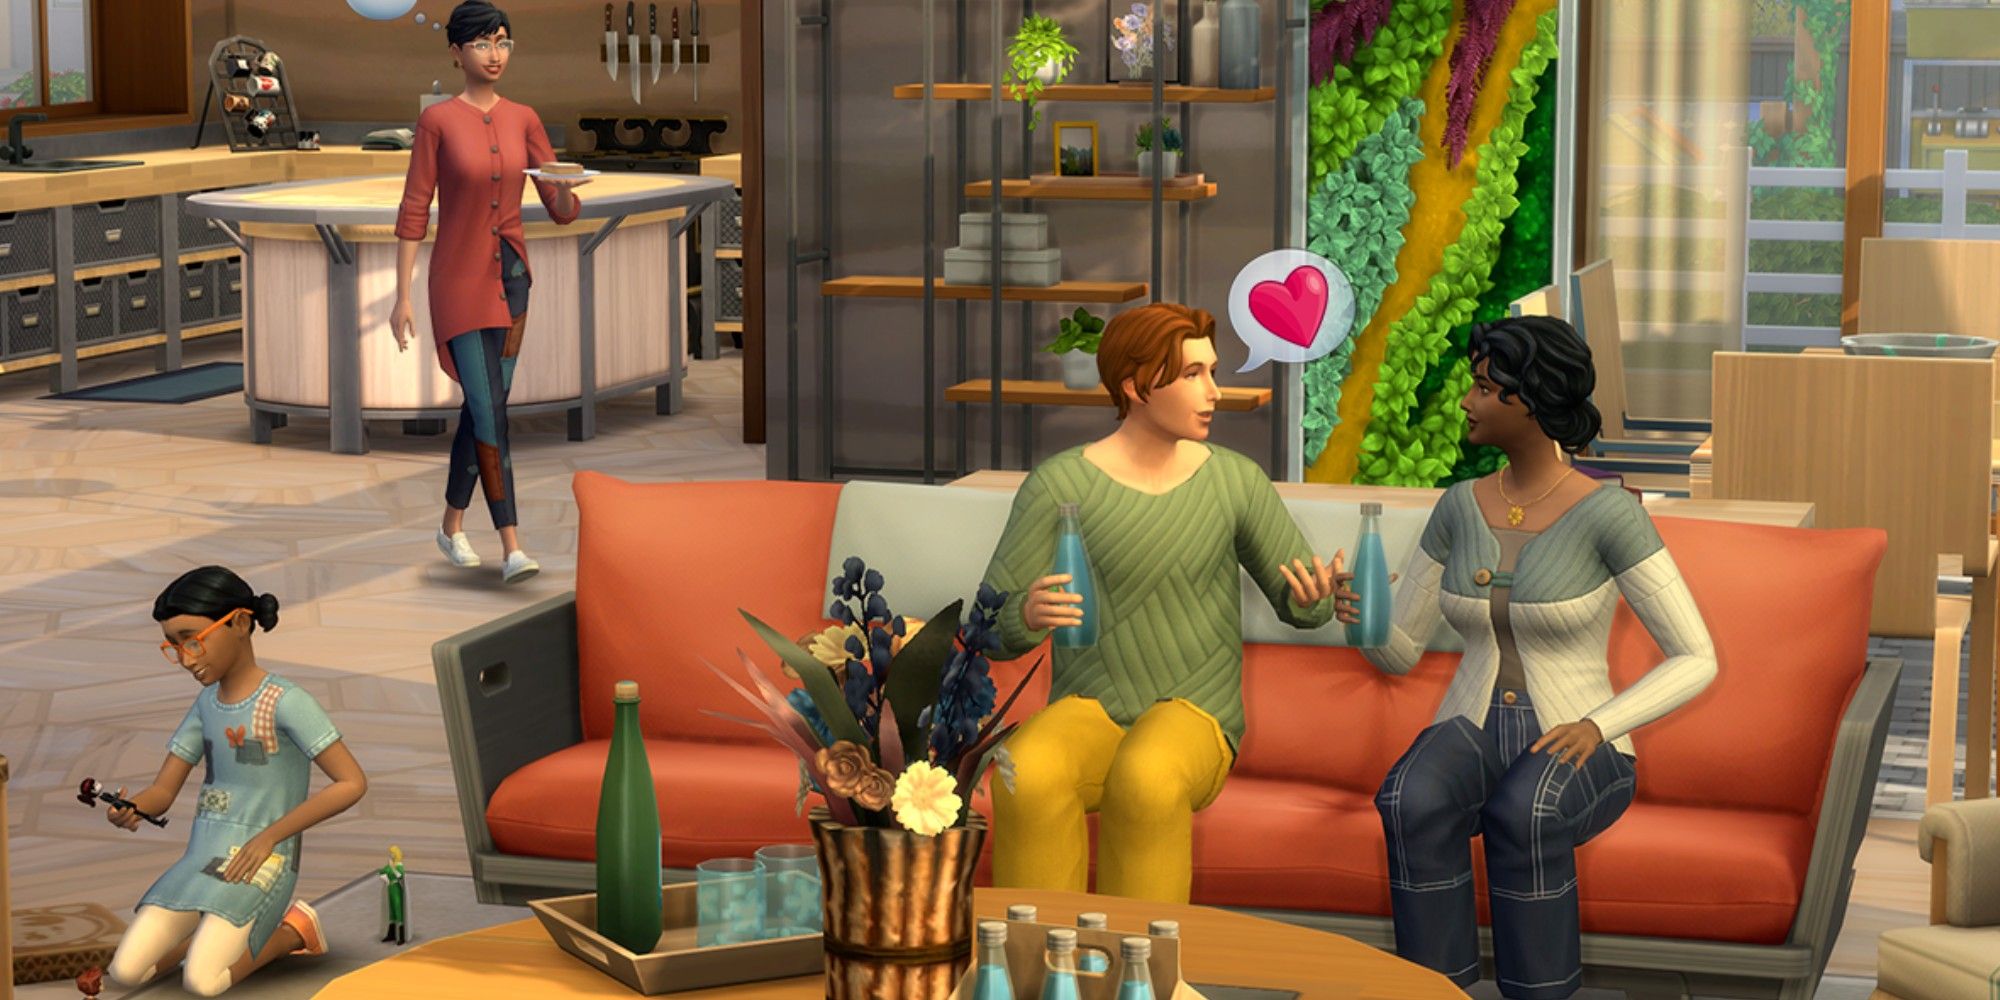 Two sims chat on a couch and a third one walks behind them